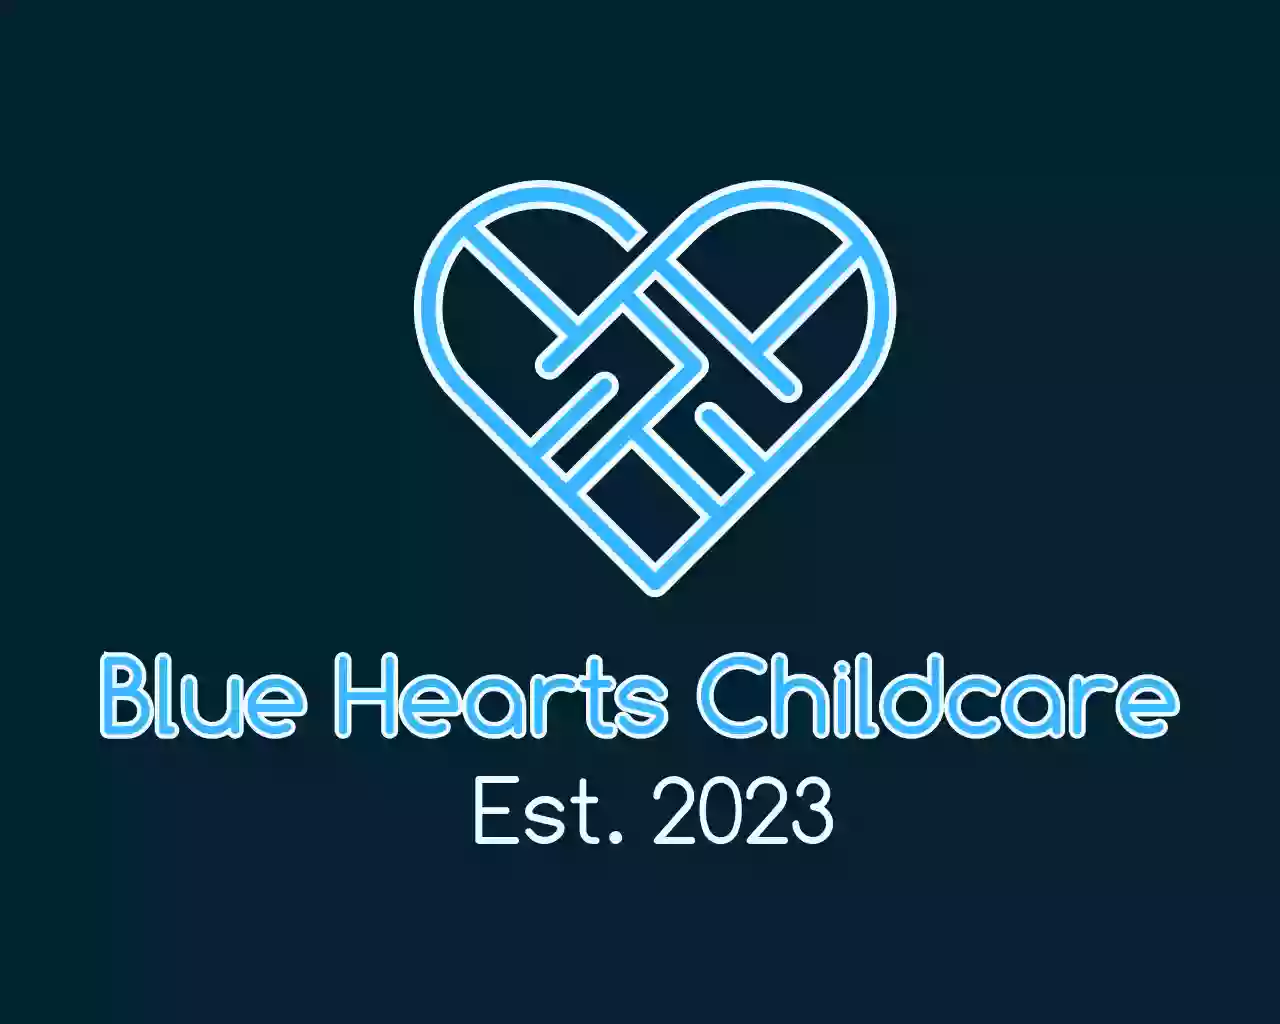 Blue Hearts Childcare